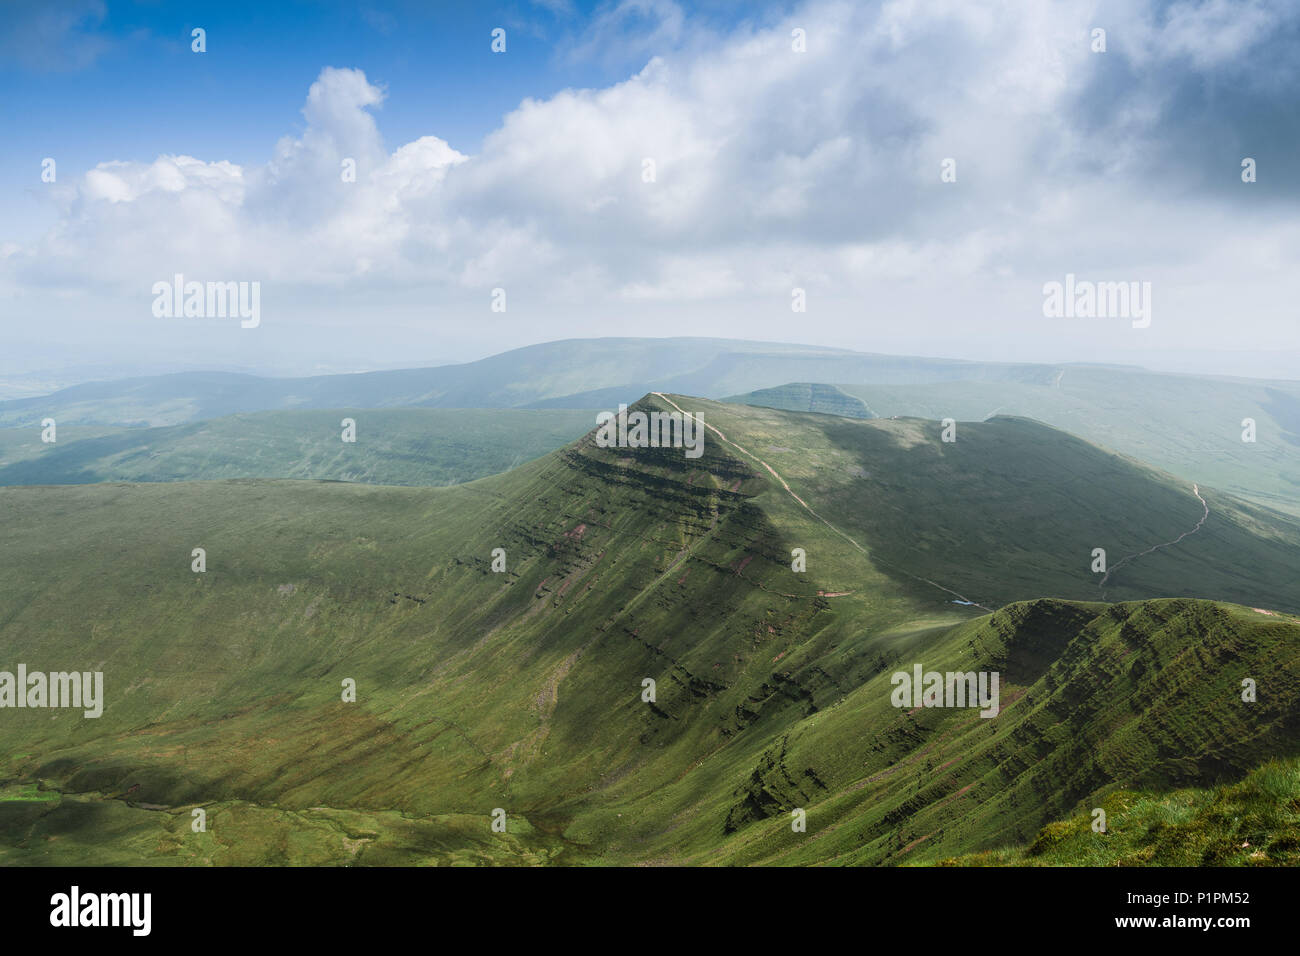 A view from the top of Pen Y Fan - the tallest mountain in the southern UK (south of Snowdonia). Wales, UK Stock Photo